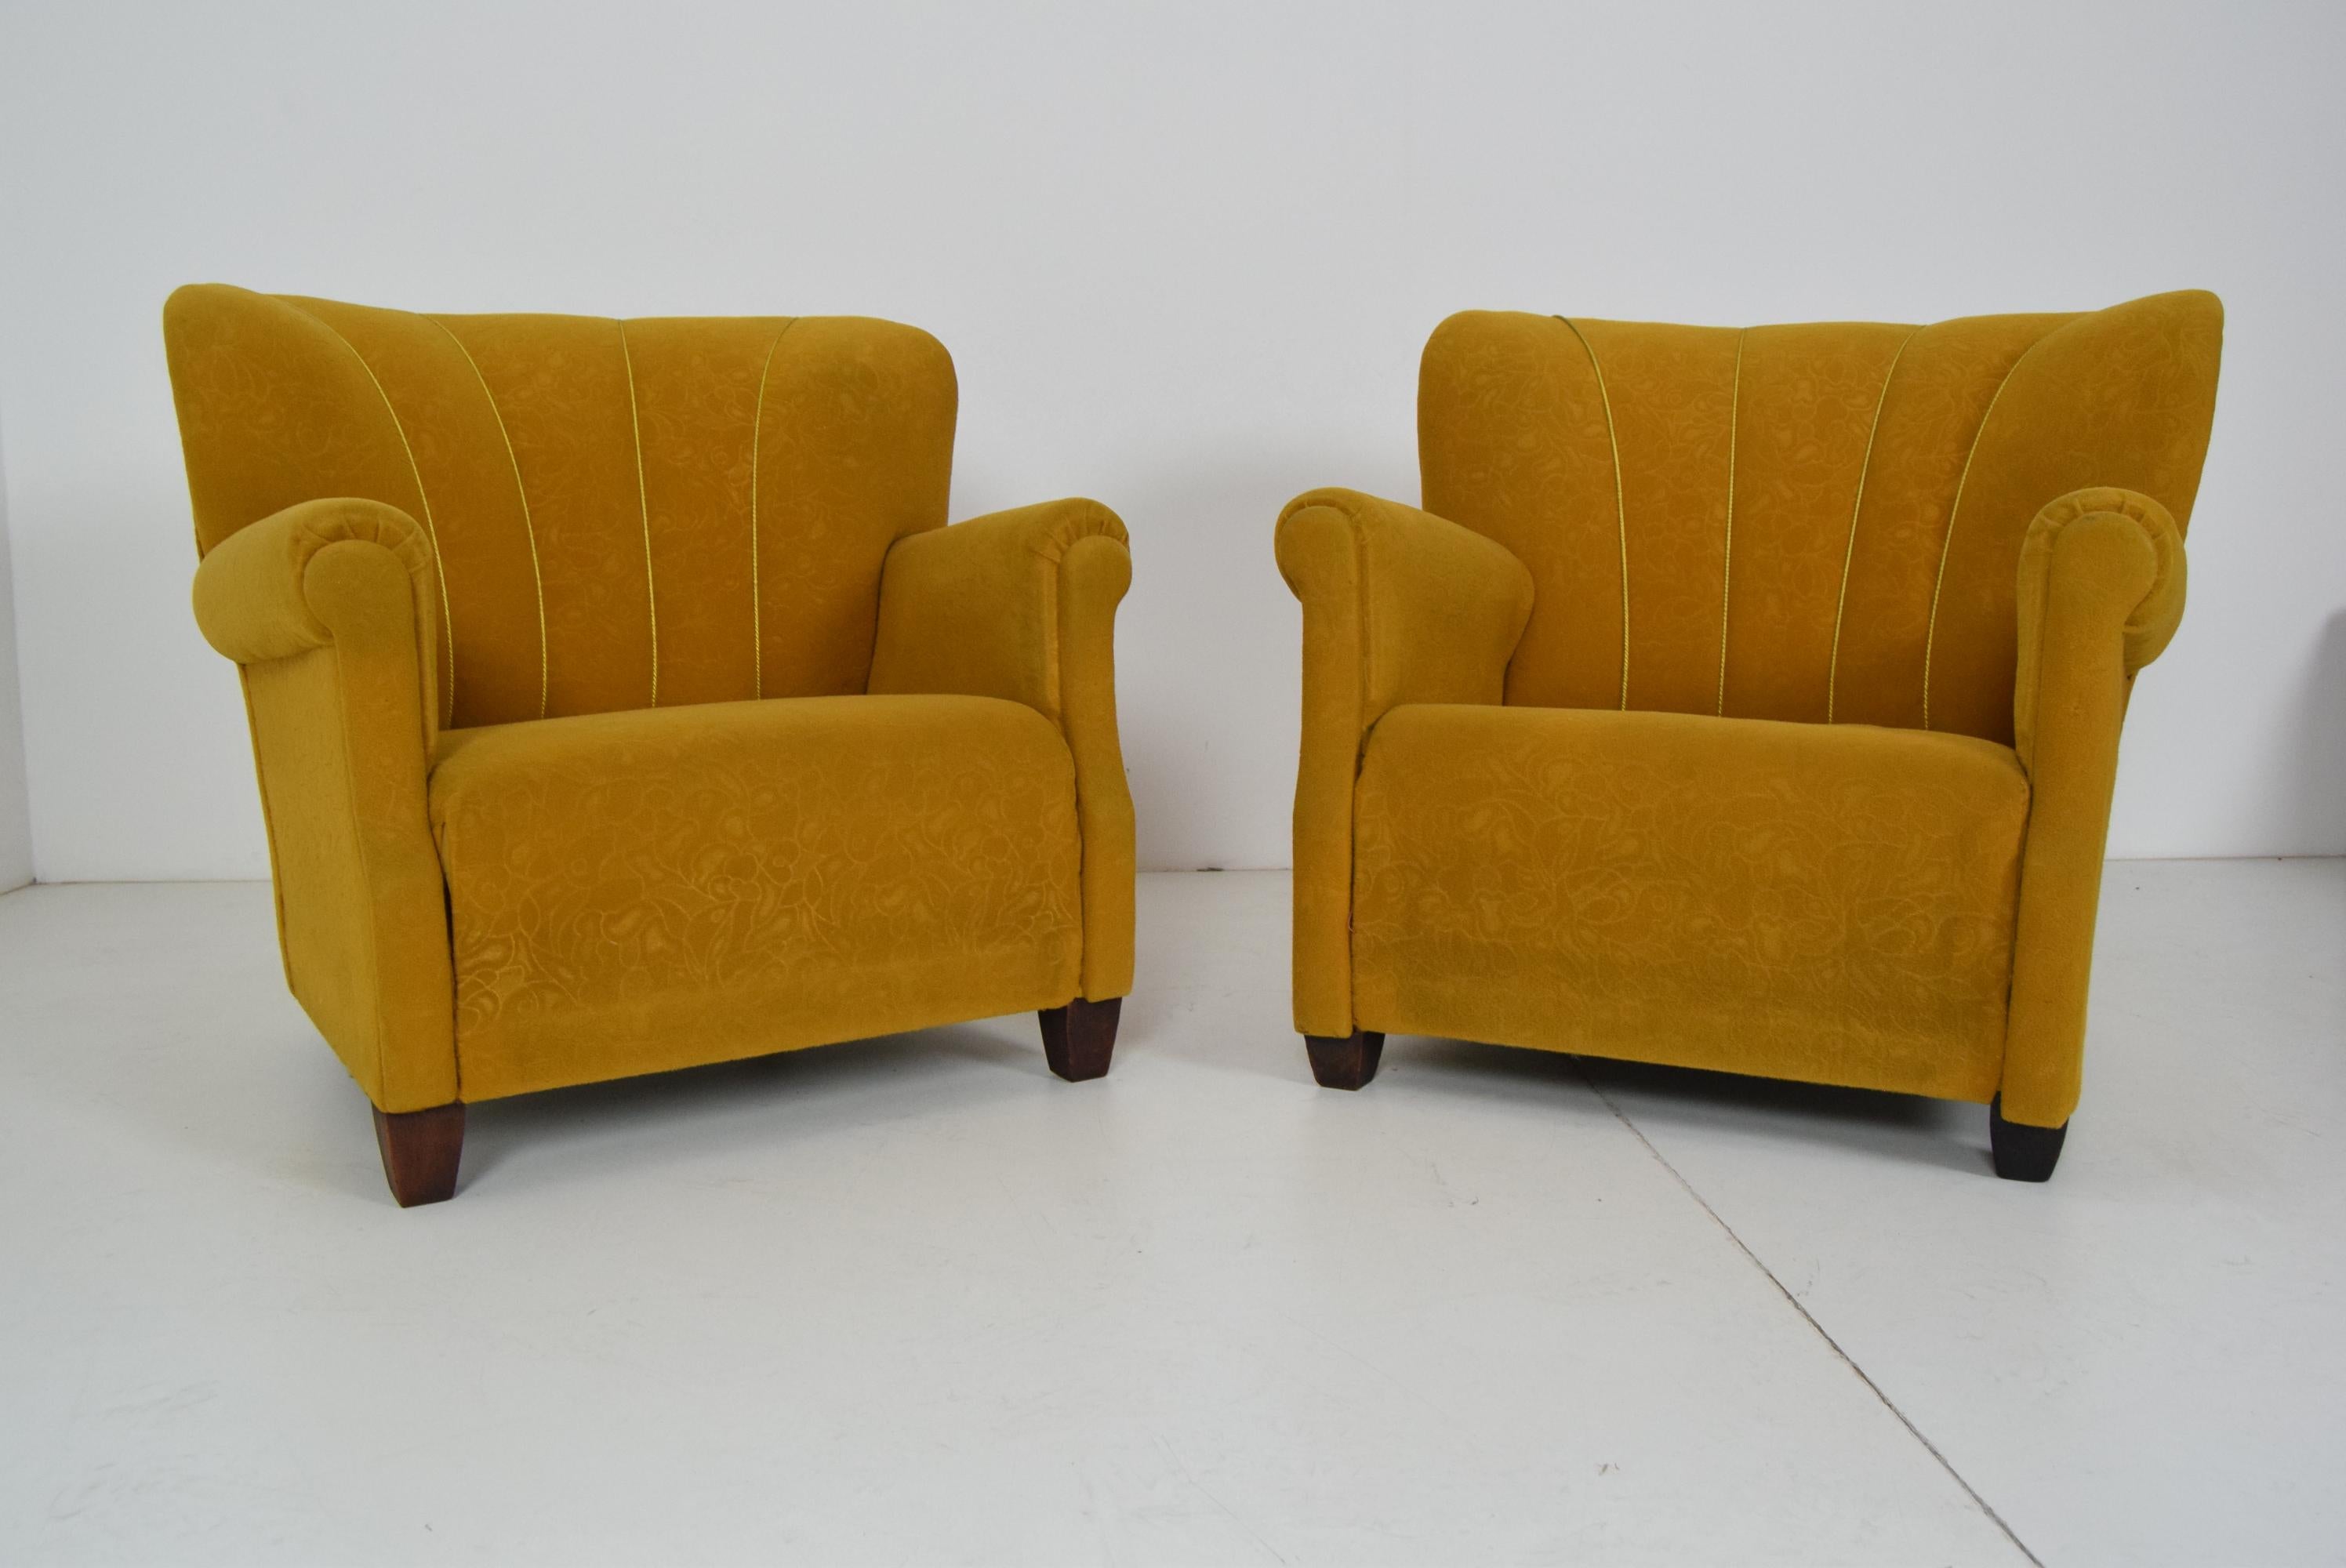 Made in Czechoslovakia
Made of fabric and wood
Upholstery has signs of use
Suitable for renovation upholstery
Original condition.